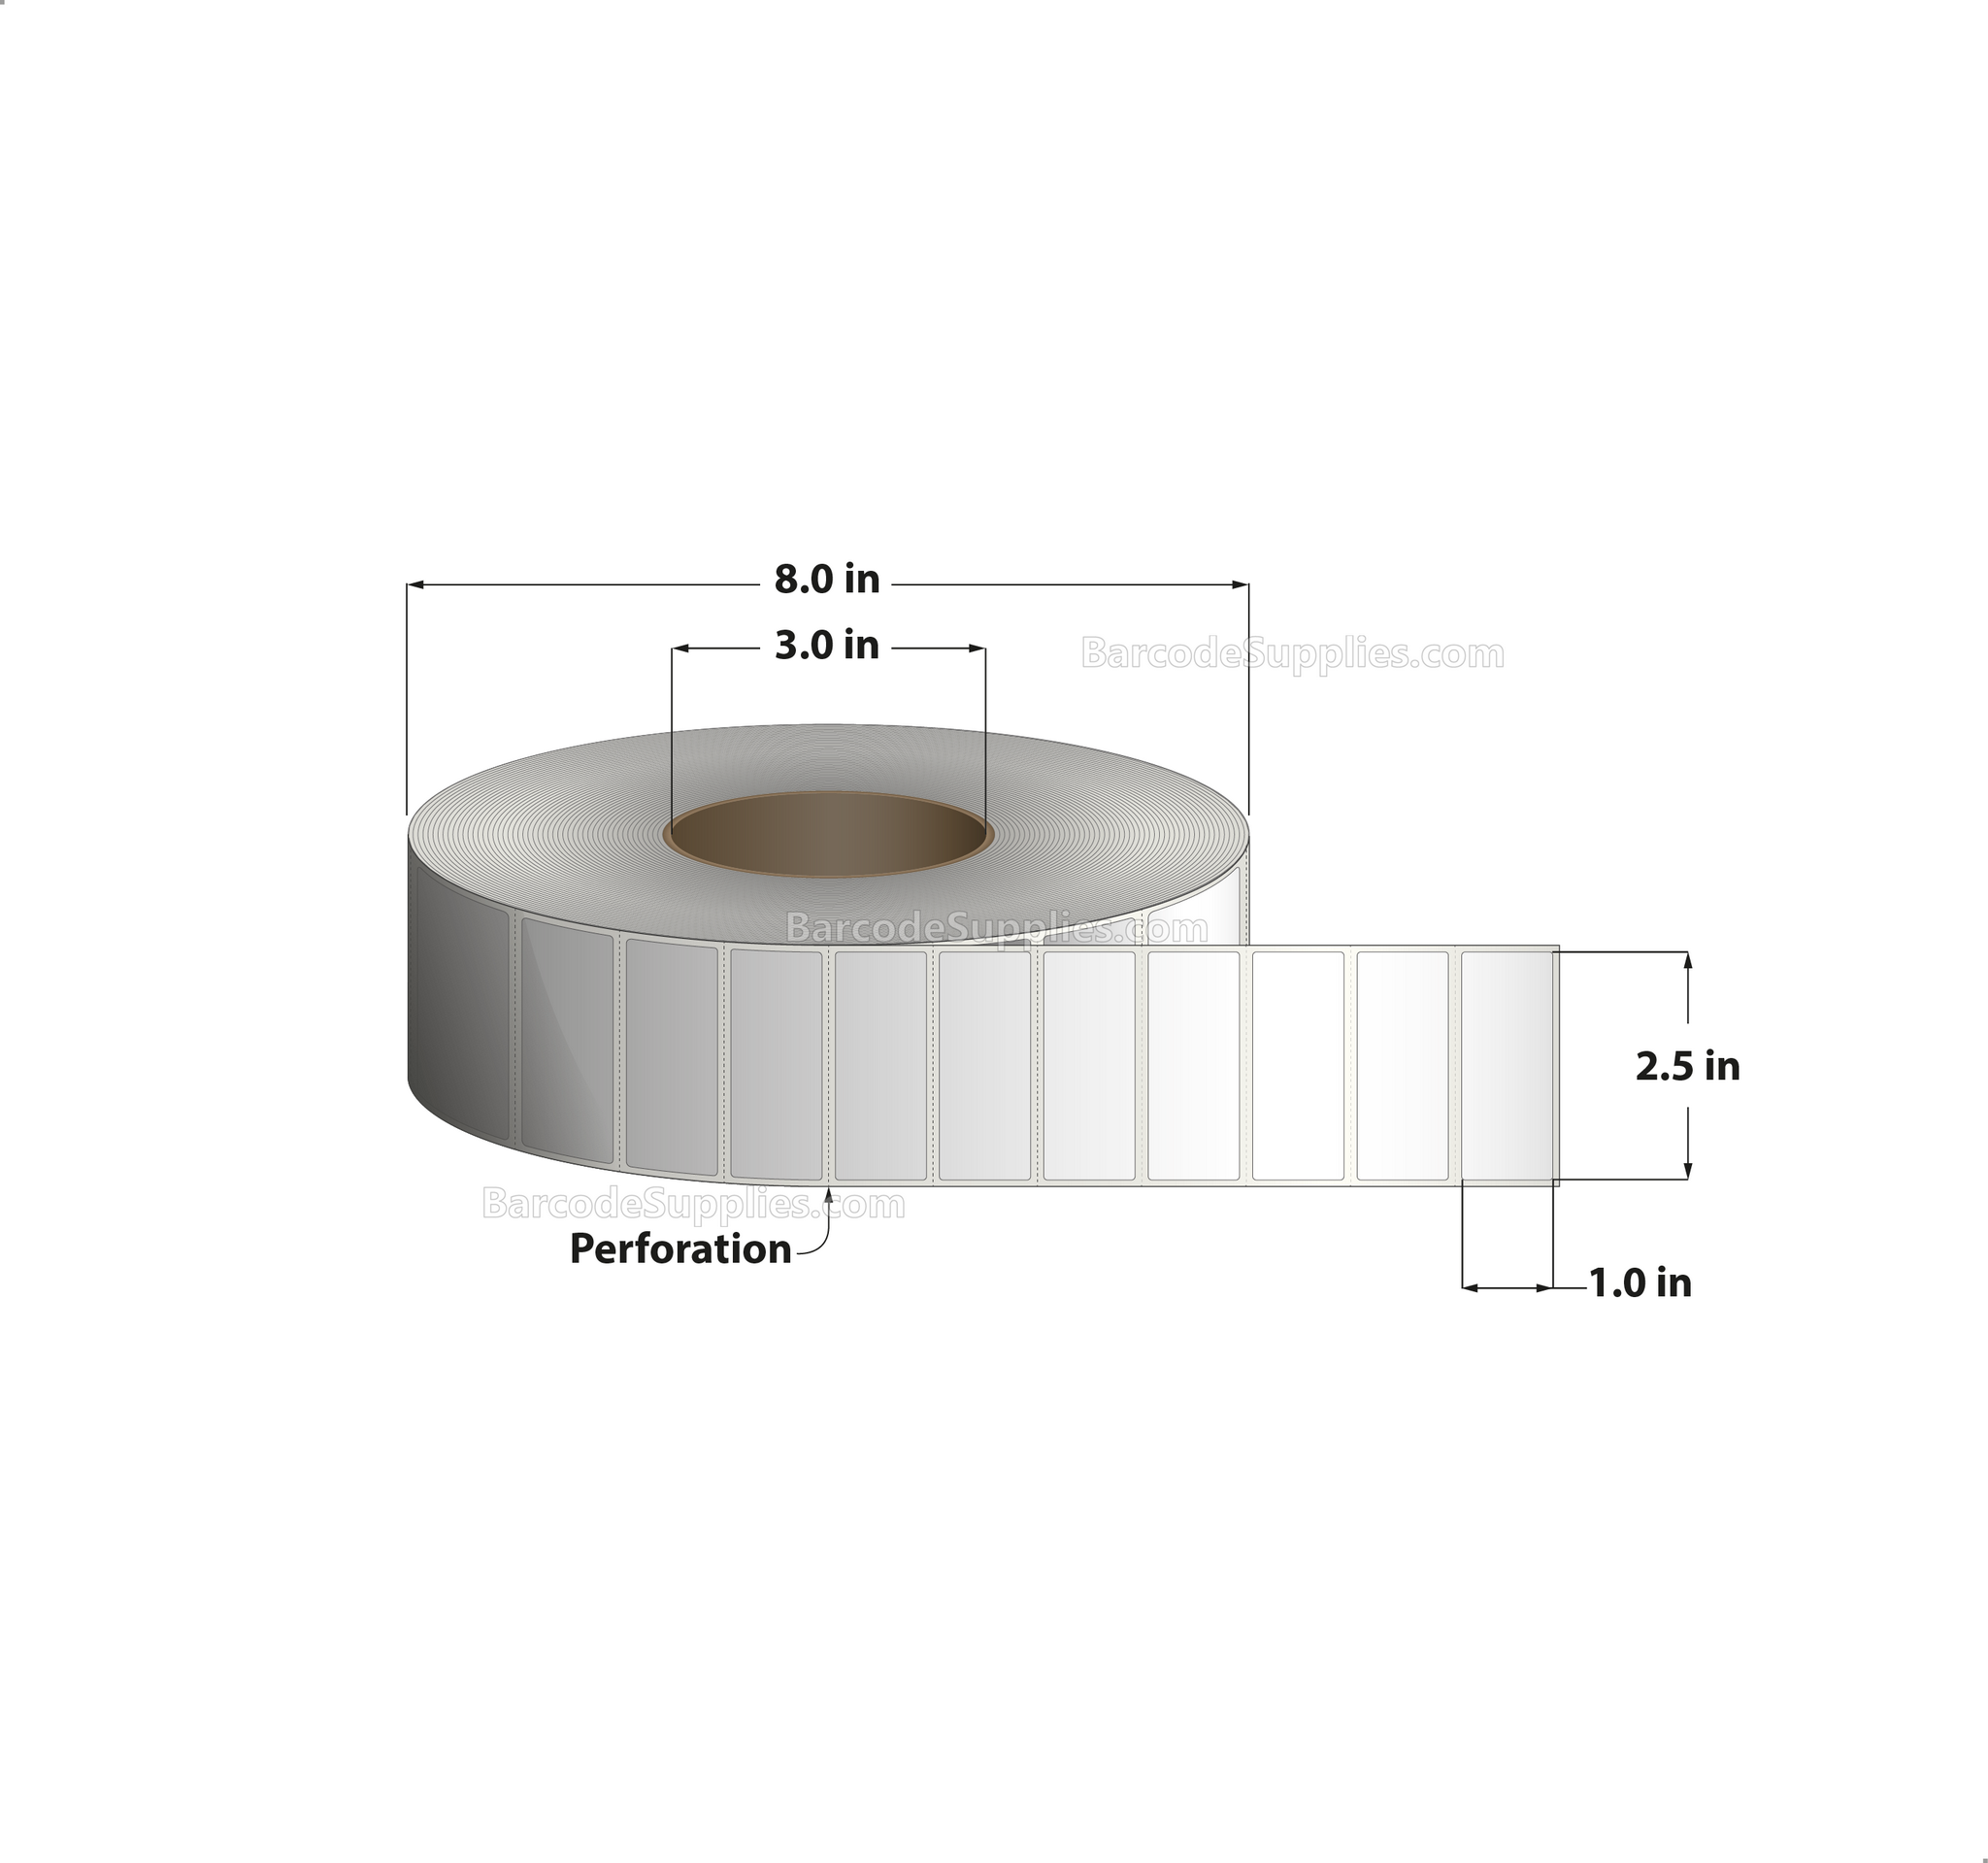 2.5 x 1 Direct Thermal White Labels With Acrylic Adhesive - Perforated - 5500 Labels Per Roll - Carton Of 8 Rolls - 44000 Labels Total - MPN: RD-25-1-5500-3 - BarcodeSource, Inc.